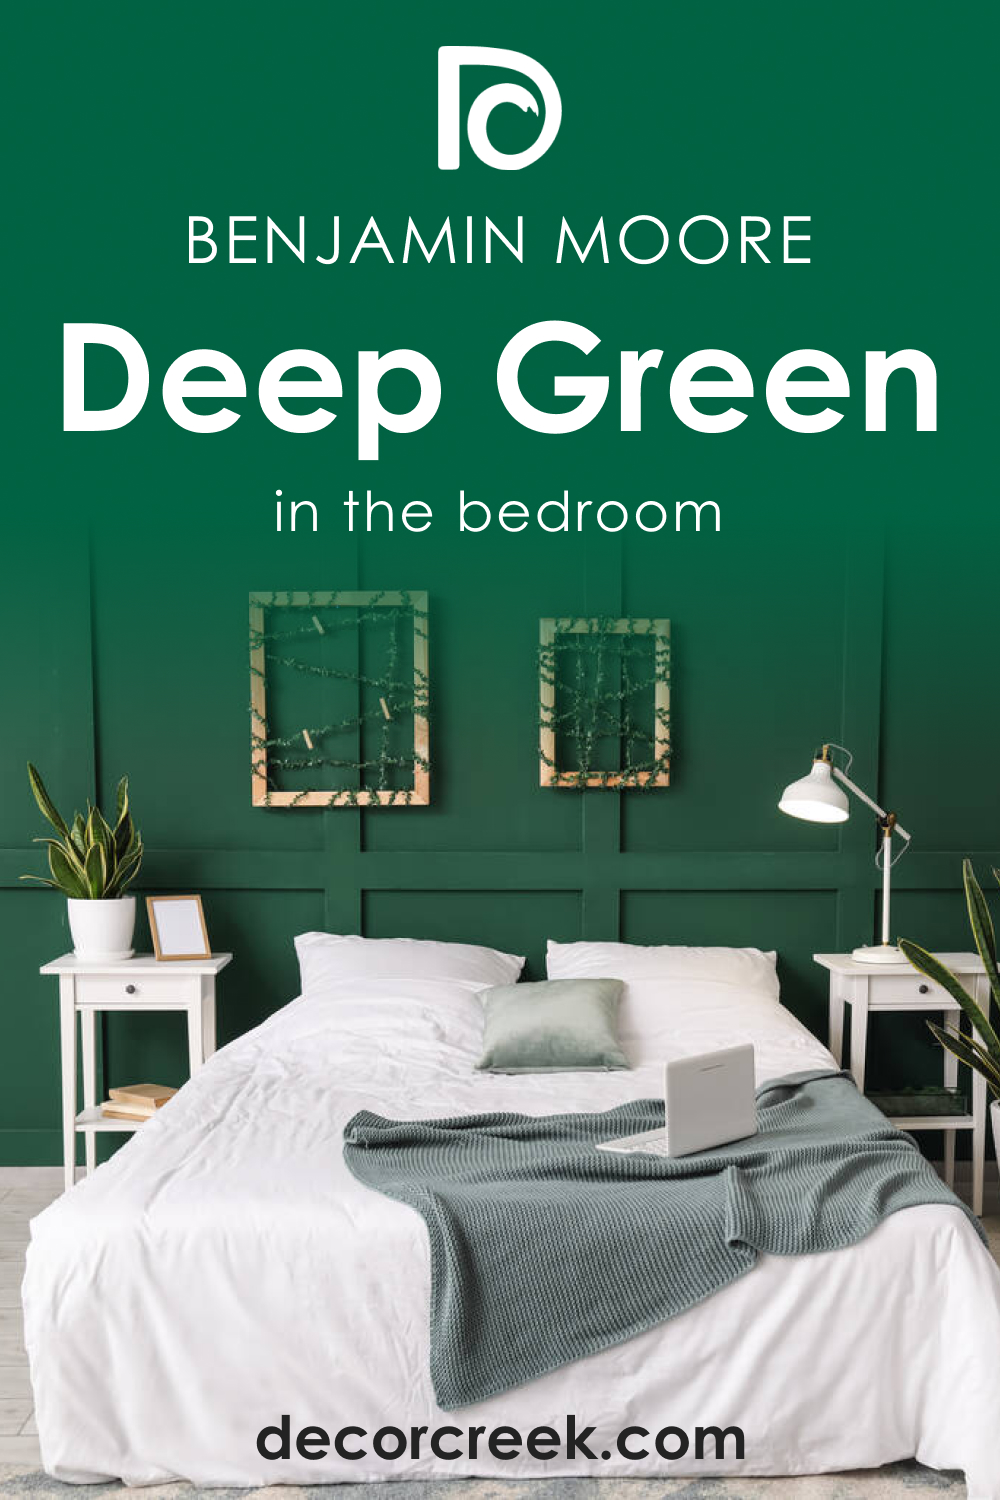 How to Use Deep Green 2039-10 in the Bedroom?